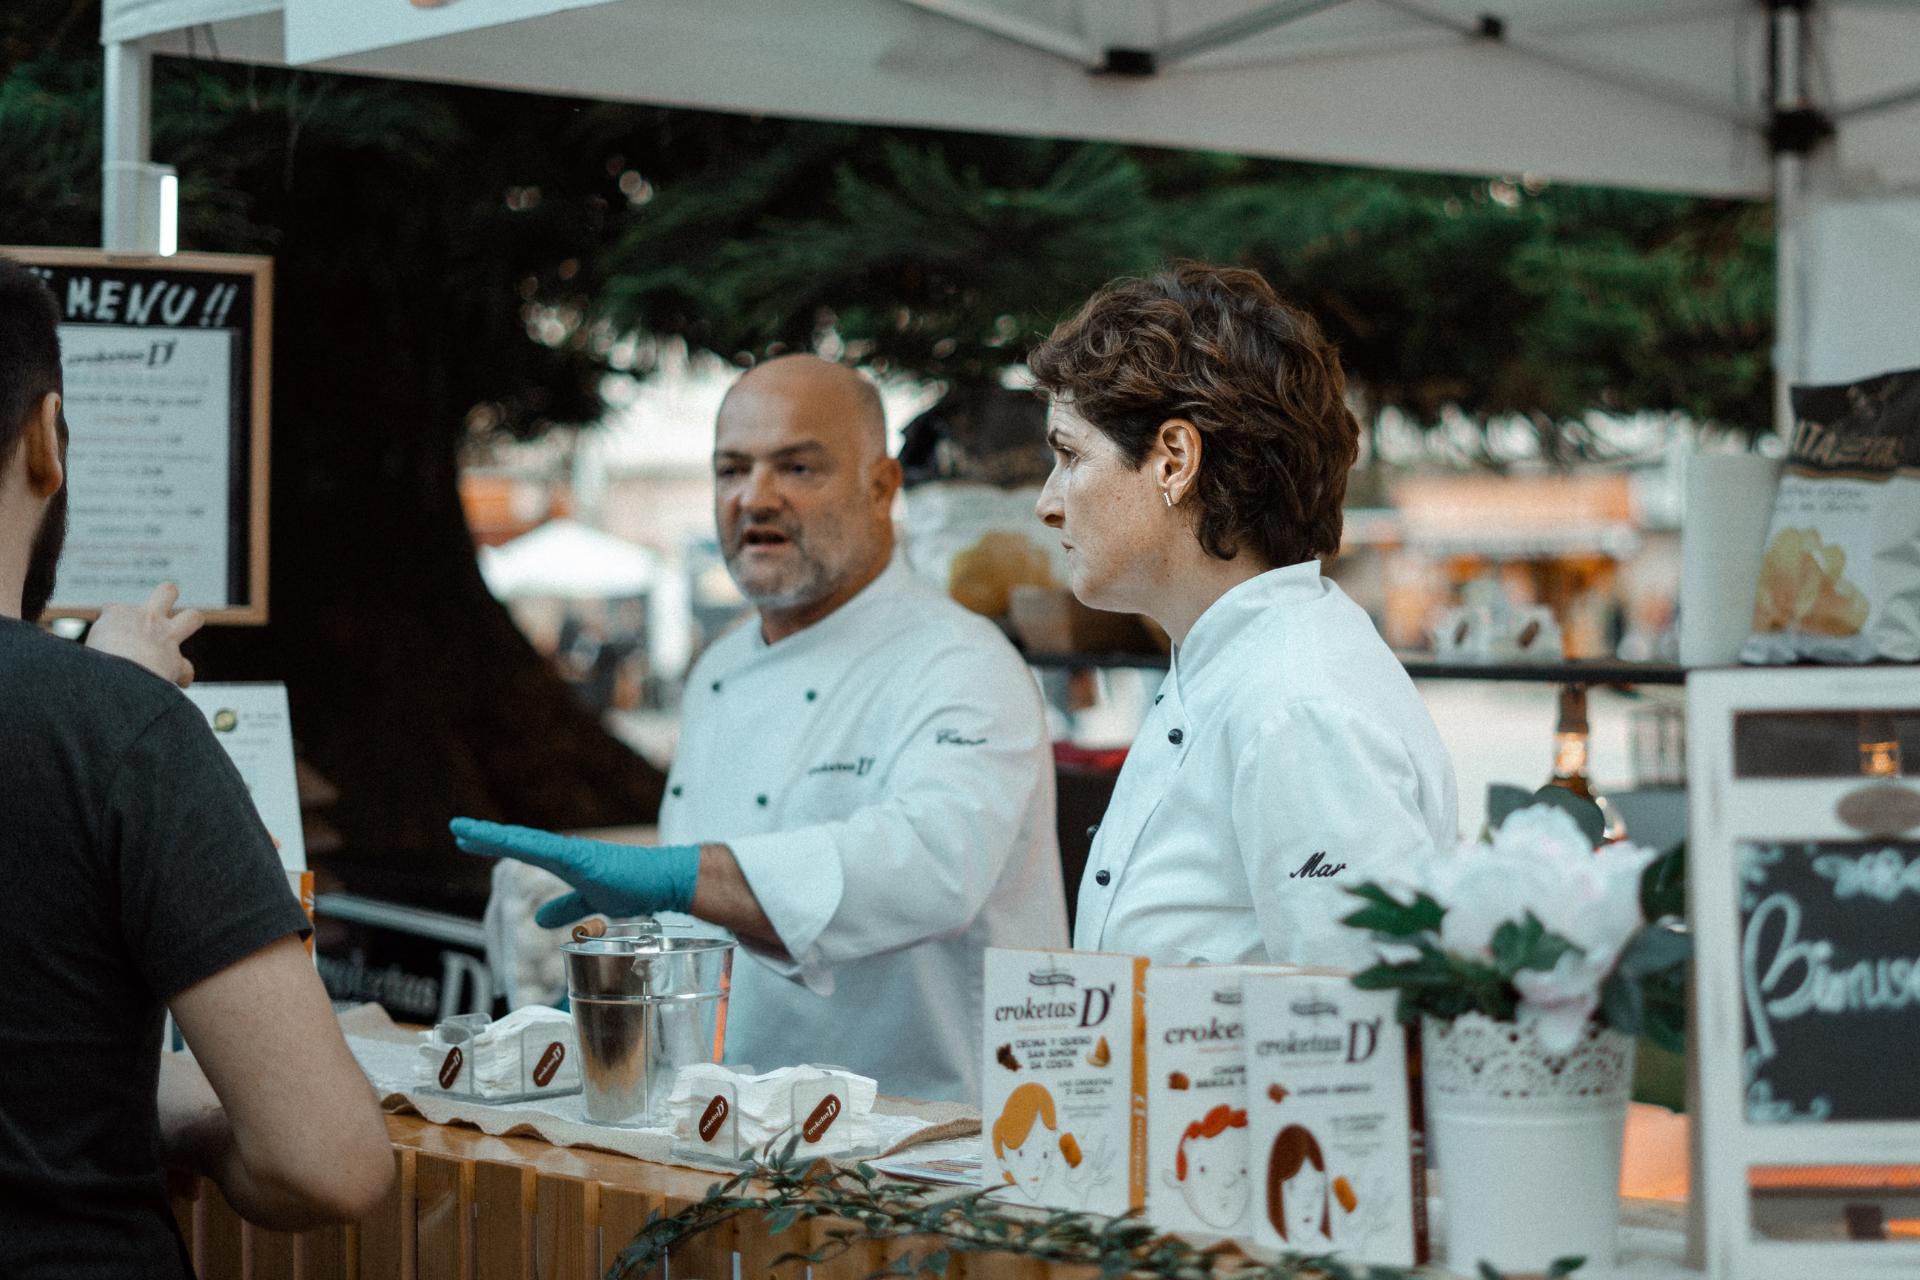 food stand in Spain with chefs talking to customers